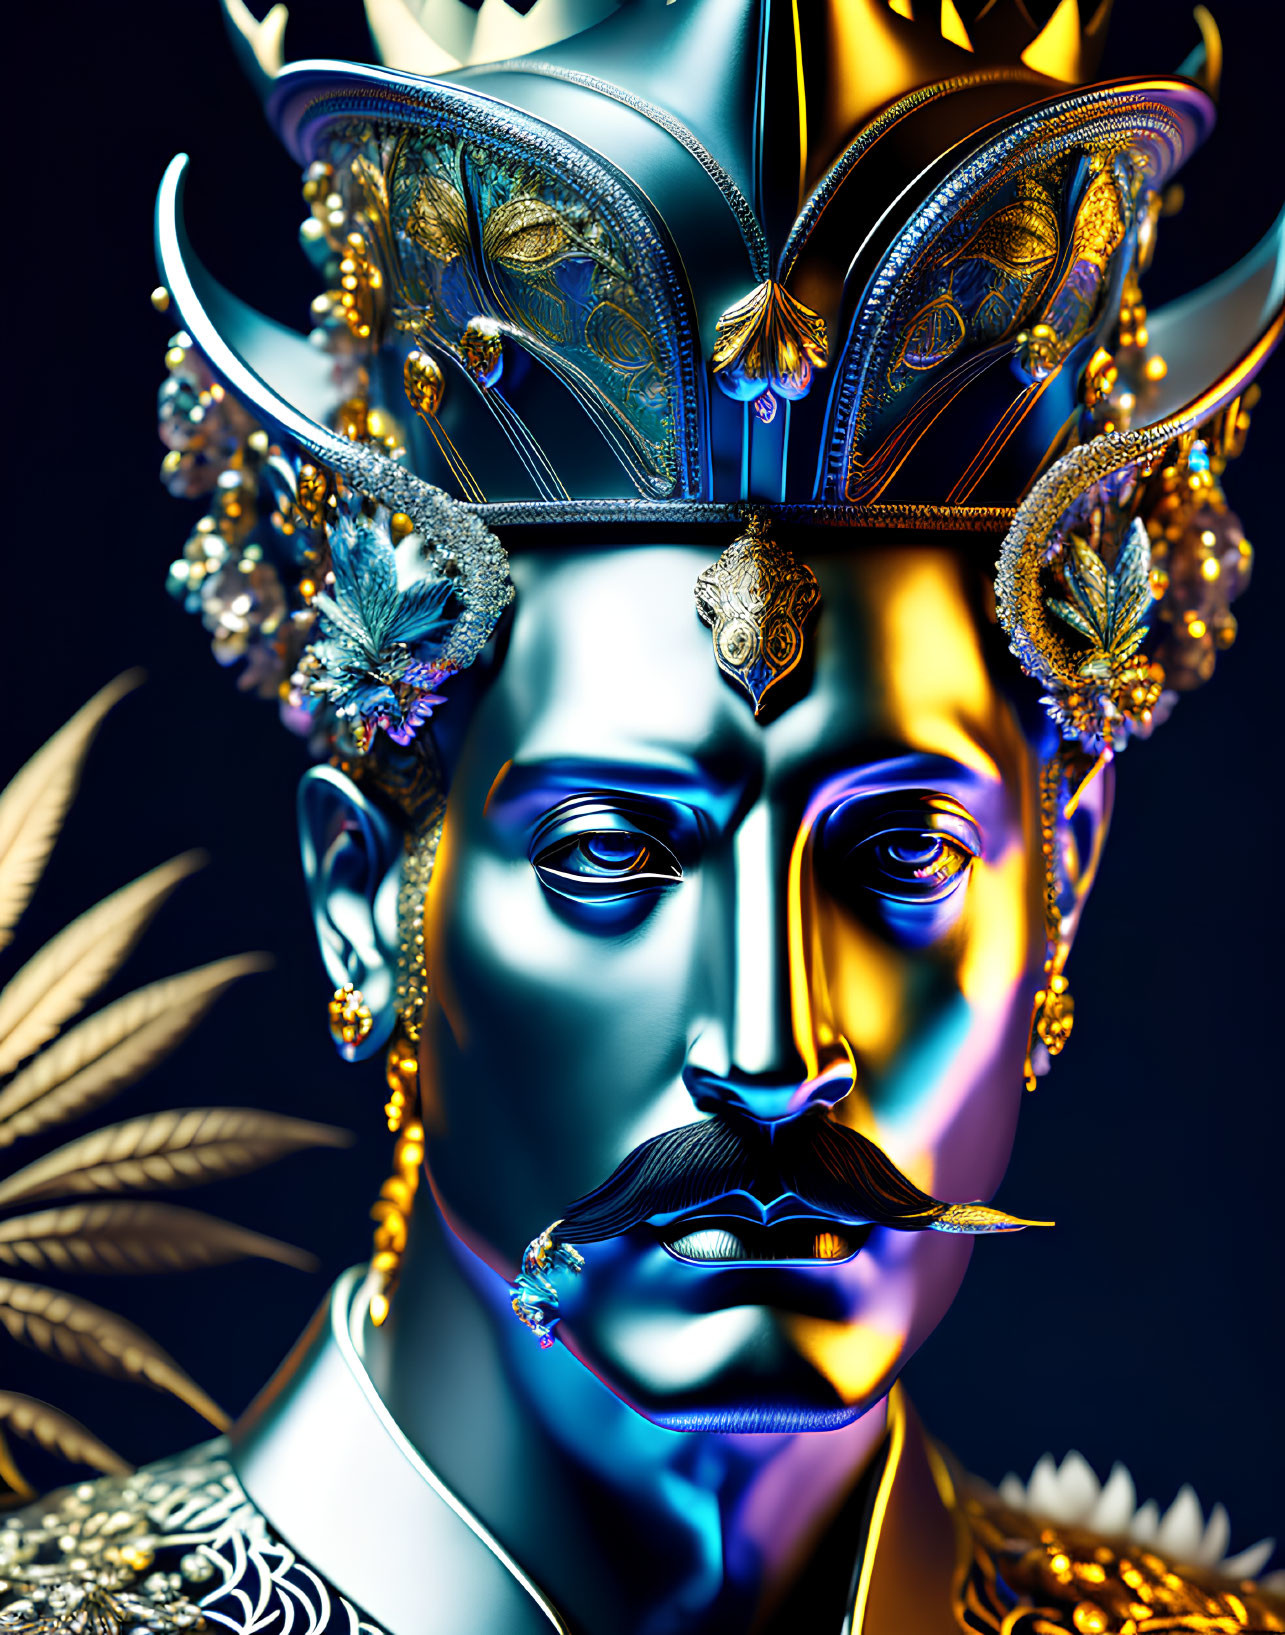 Royal Figure with Elaborate Golden Headwear and Jewelry on Dark Background